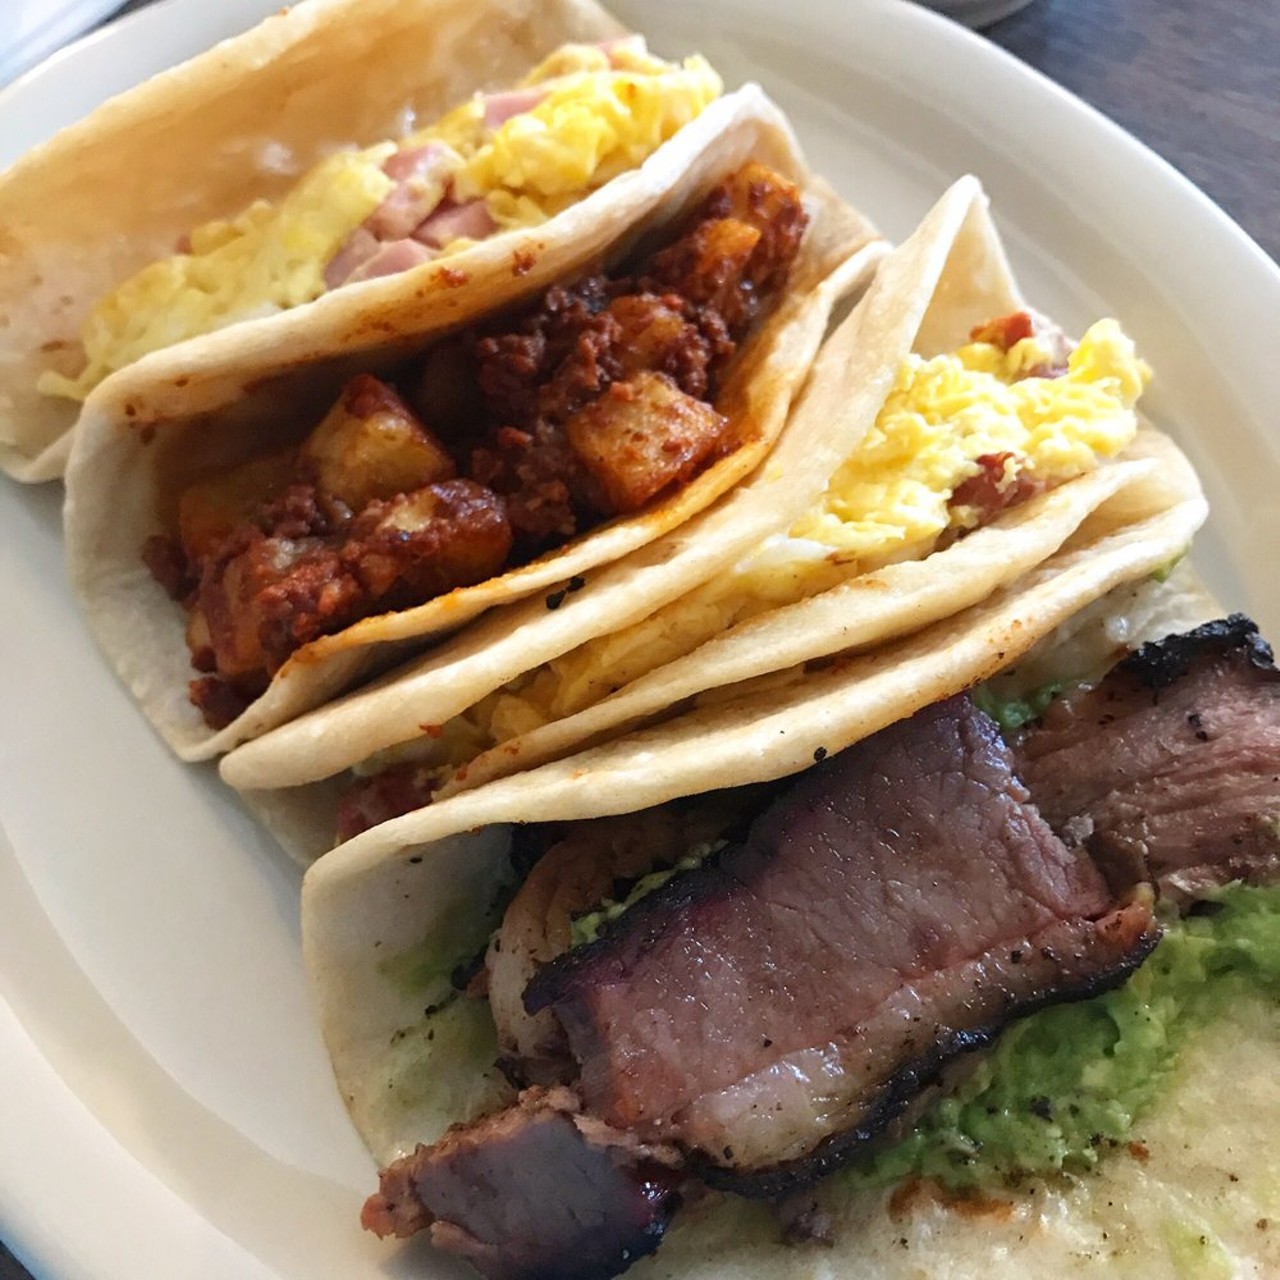 Garcia’s
842 Fredericksburg Rd, (210) 735-4525, facebook.com
Brisket tacos are the name of the game at Garcia’s, which has been serving San Antonio for more than half a century. Yes, this restaurant is probably older than you.
Photo via Yelp / Alex S.